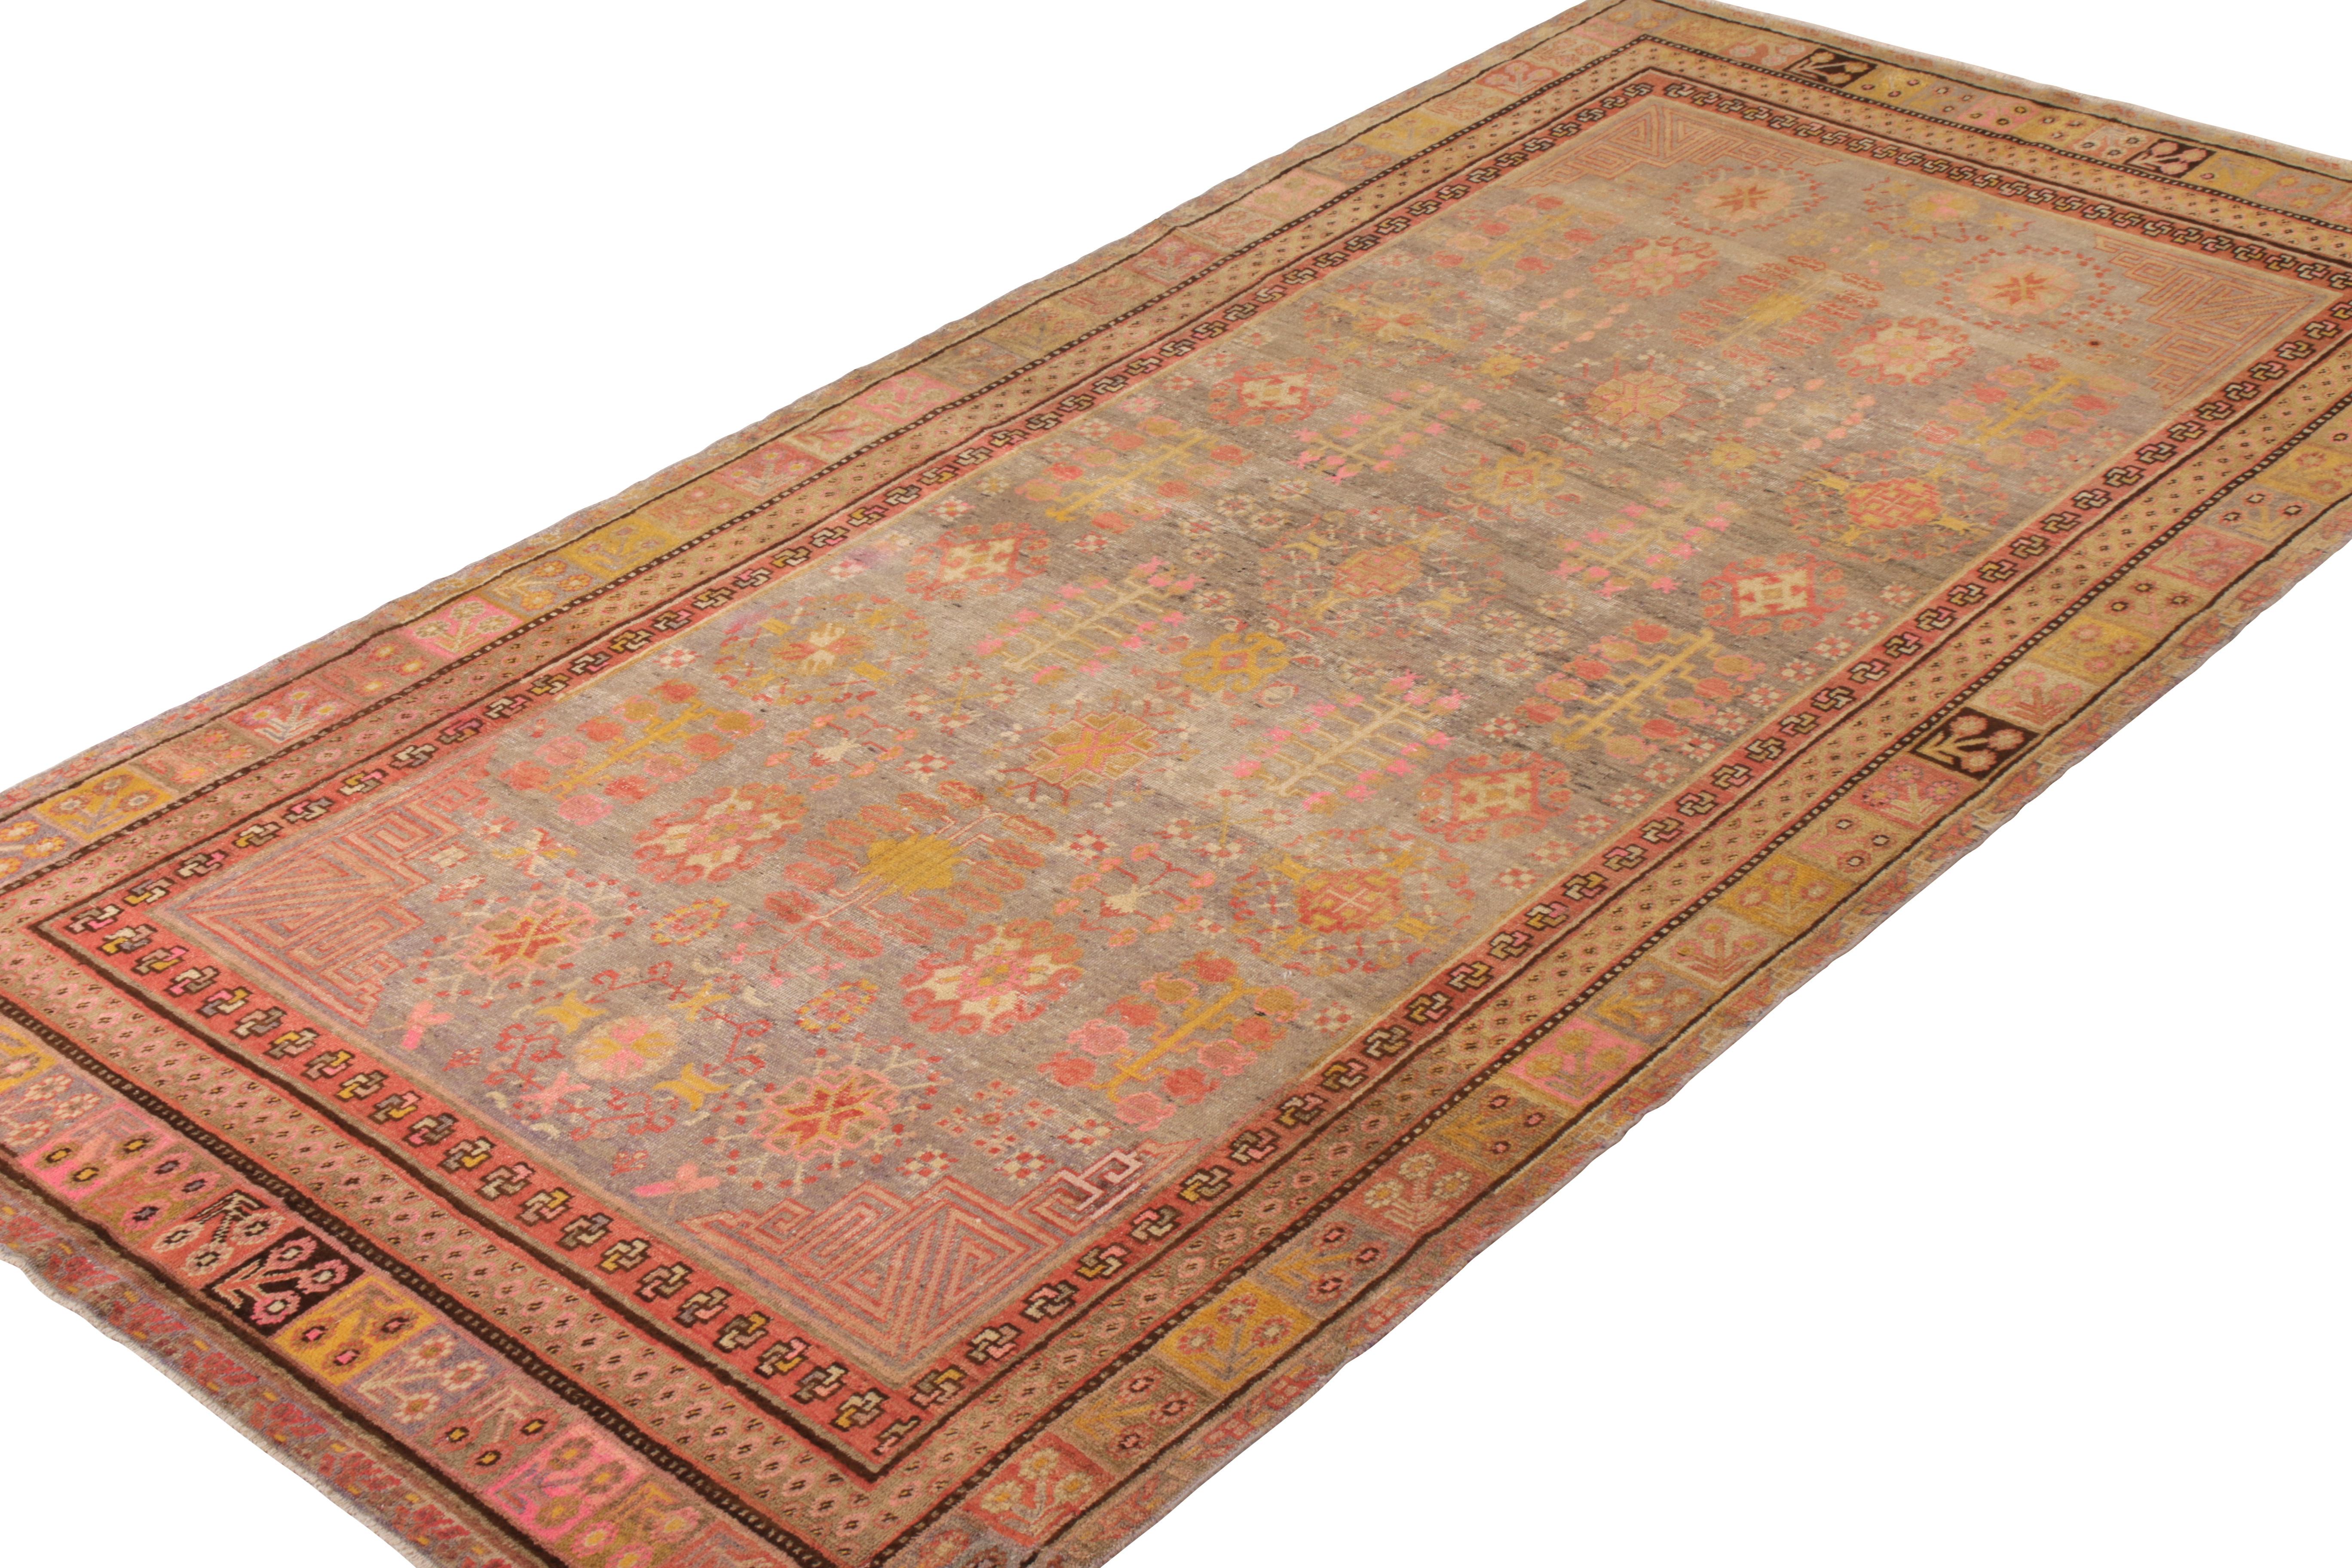 An antique 7x13 Khotan rug of unique transitional style, hand knotted in wool originating from East Turkestan circa 1920-1930. Playing hues of gold and pink atop an abrashed gray-blue, bringing life to an elegant all over pattern.

Further on the